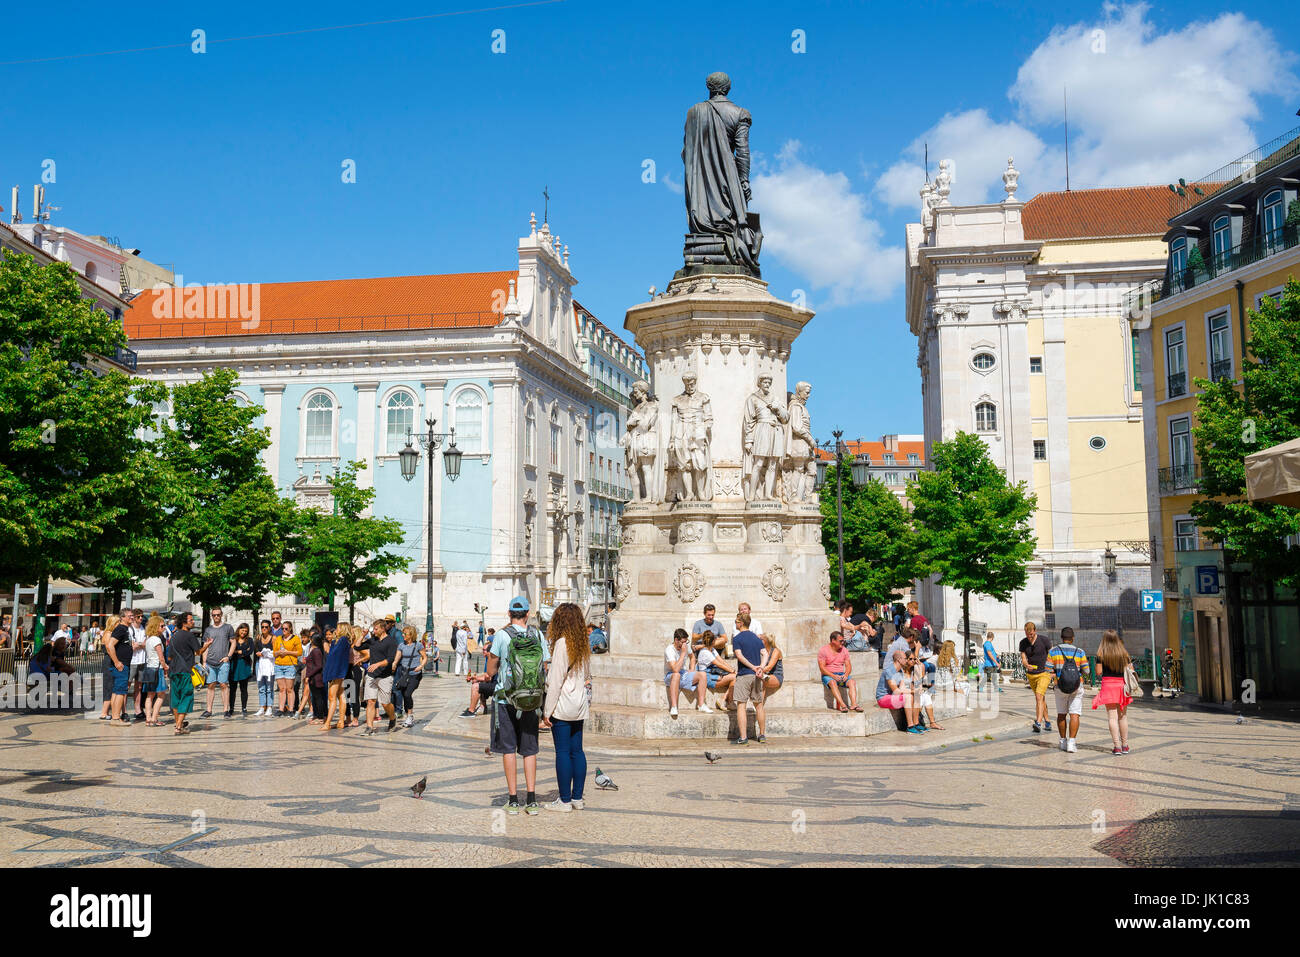 Lisbon square, view of the Praca Luis de Camoes square sited between the Chiado and Bairro Alto quarters in the centre of Lisbon, Portugal. Stock Photo